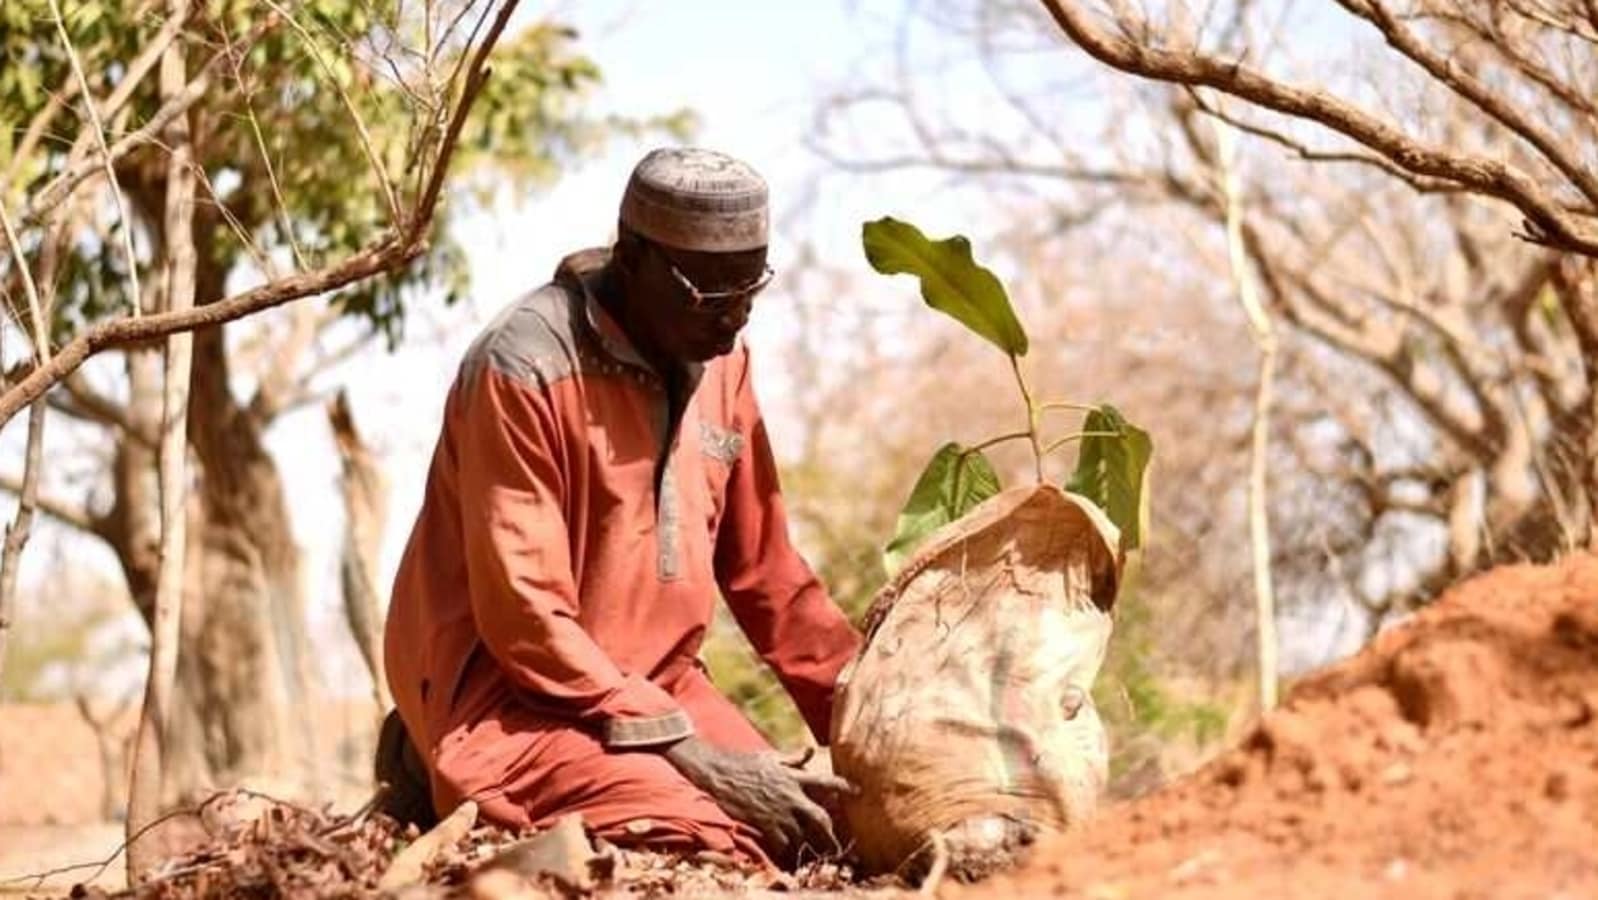 ‘Man who stopped the desert’: 70-year-old transforms barren land into forest